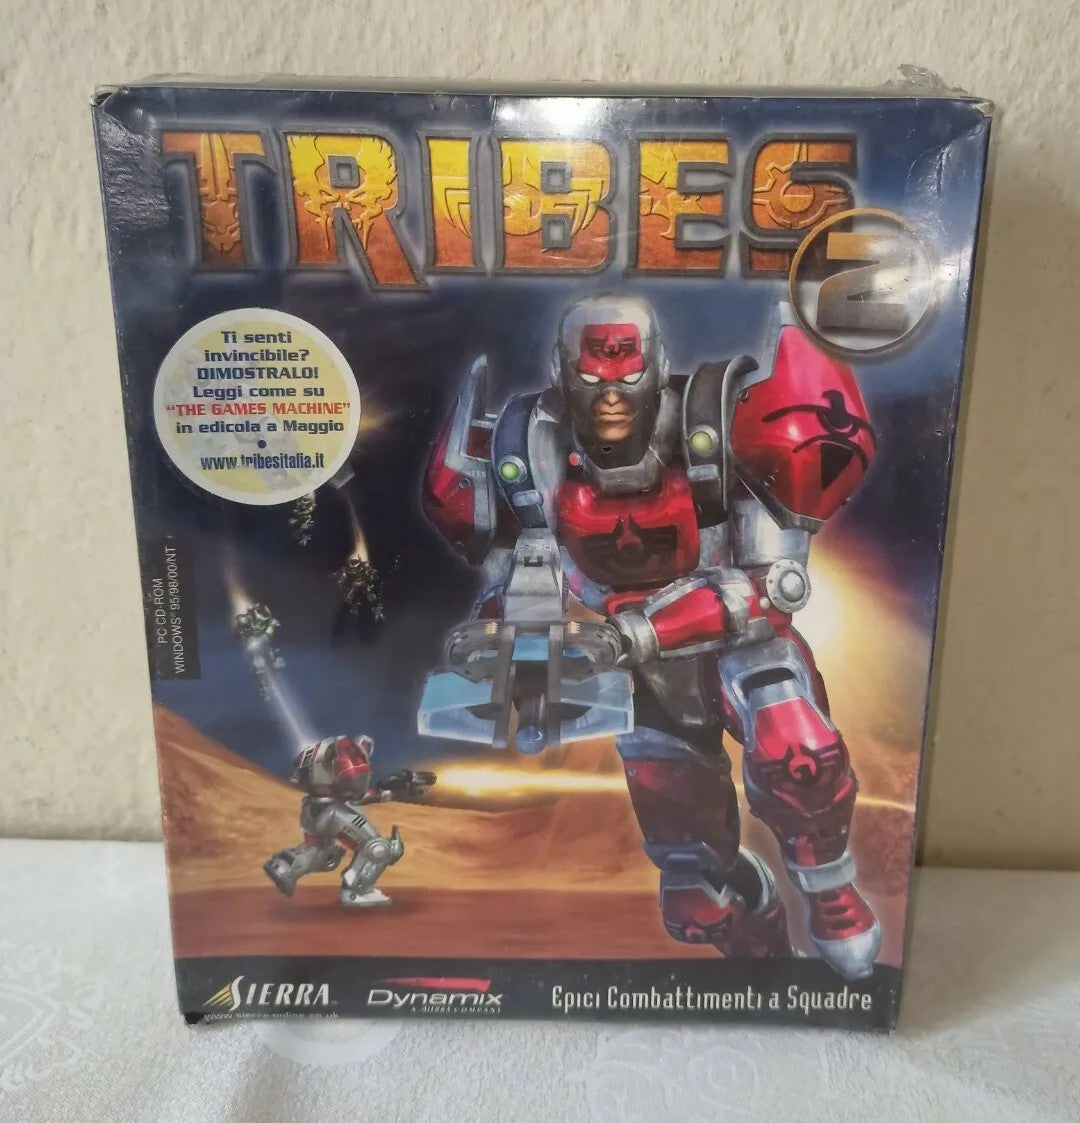 Tribes 2 PC Video Game, Sealed